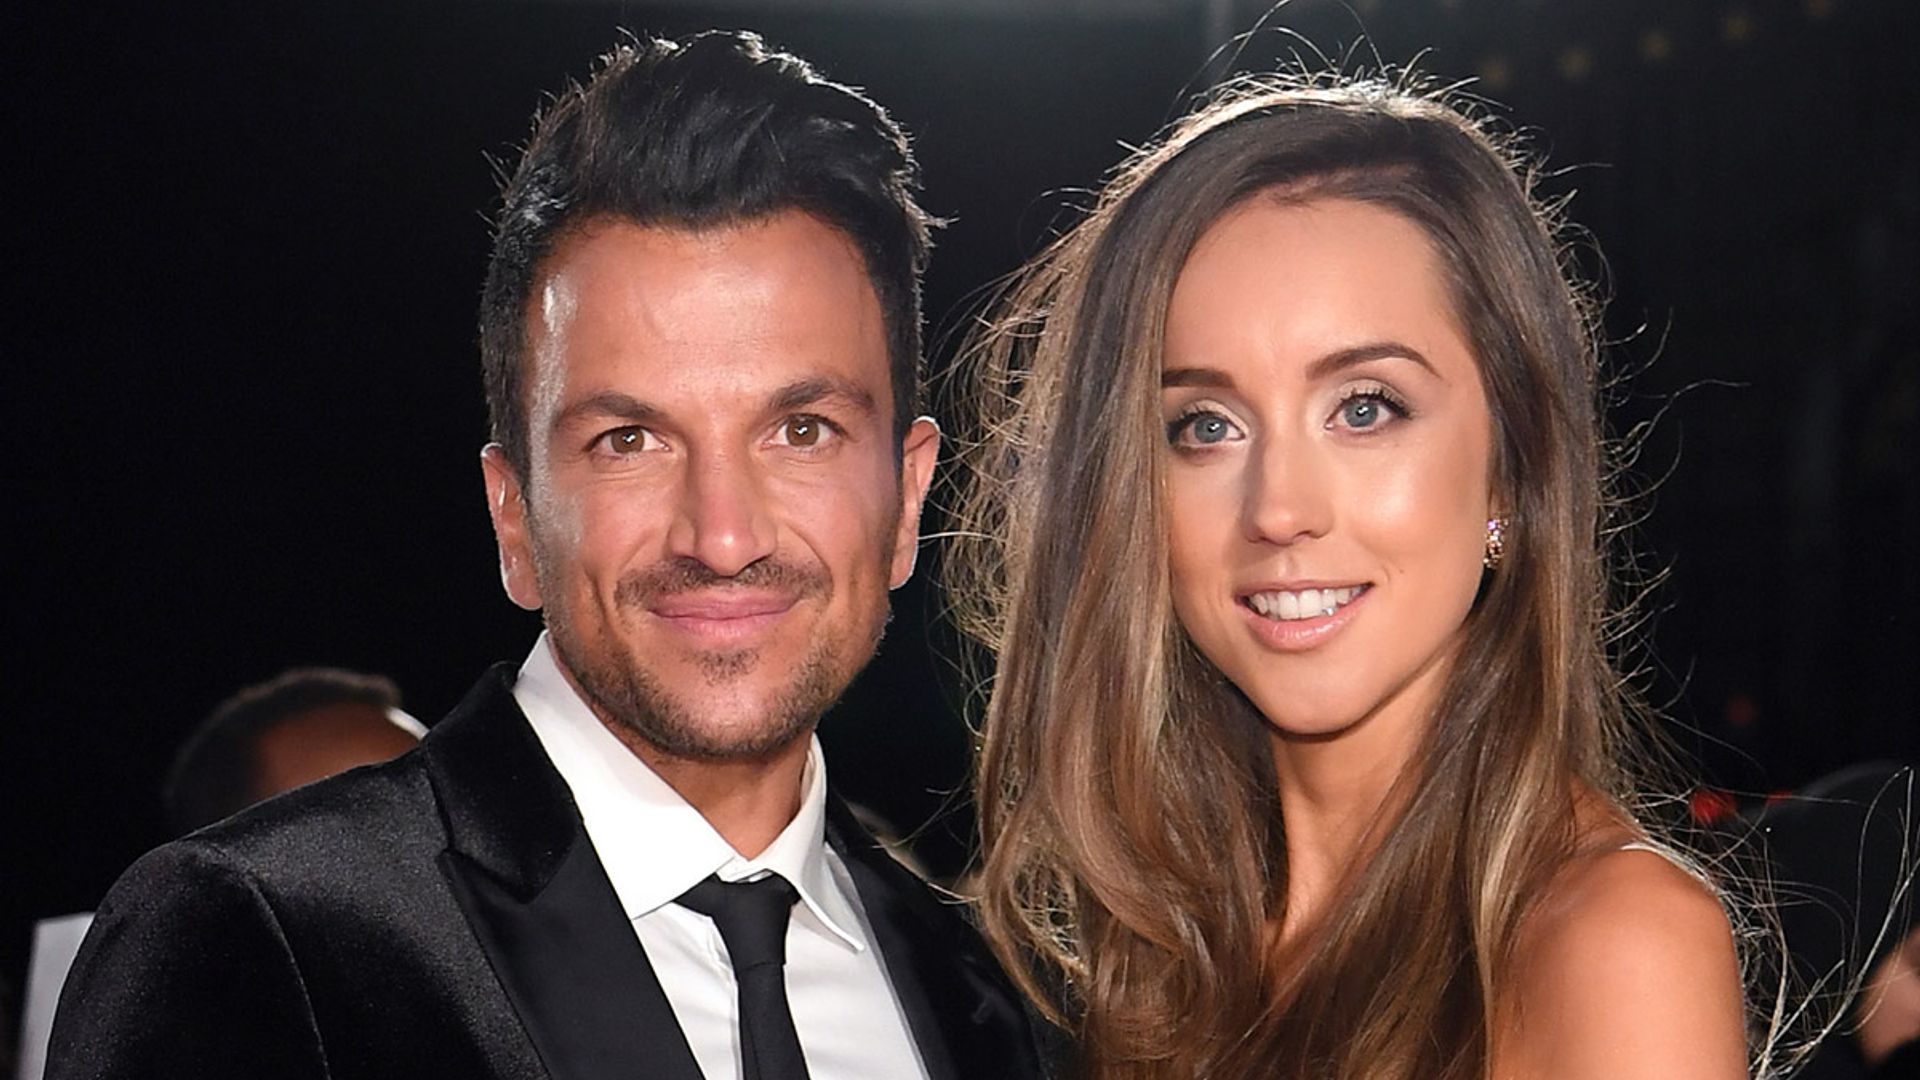 Peter Andre's wife Emily's special bedroom video has fans asking questions